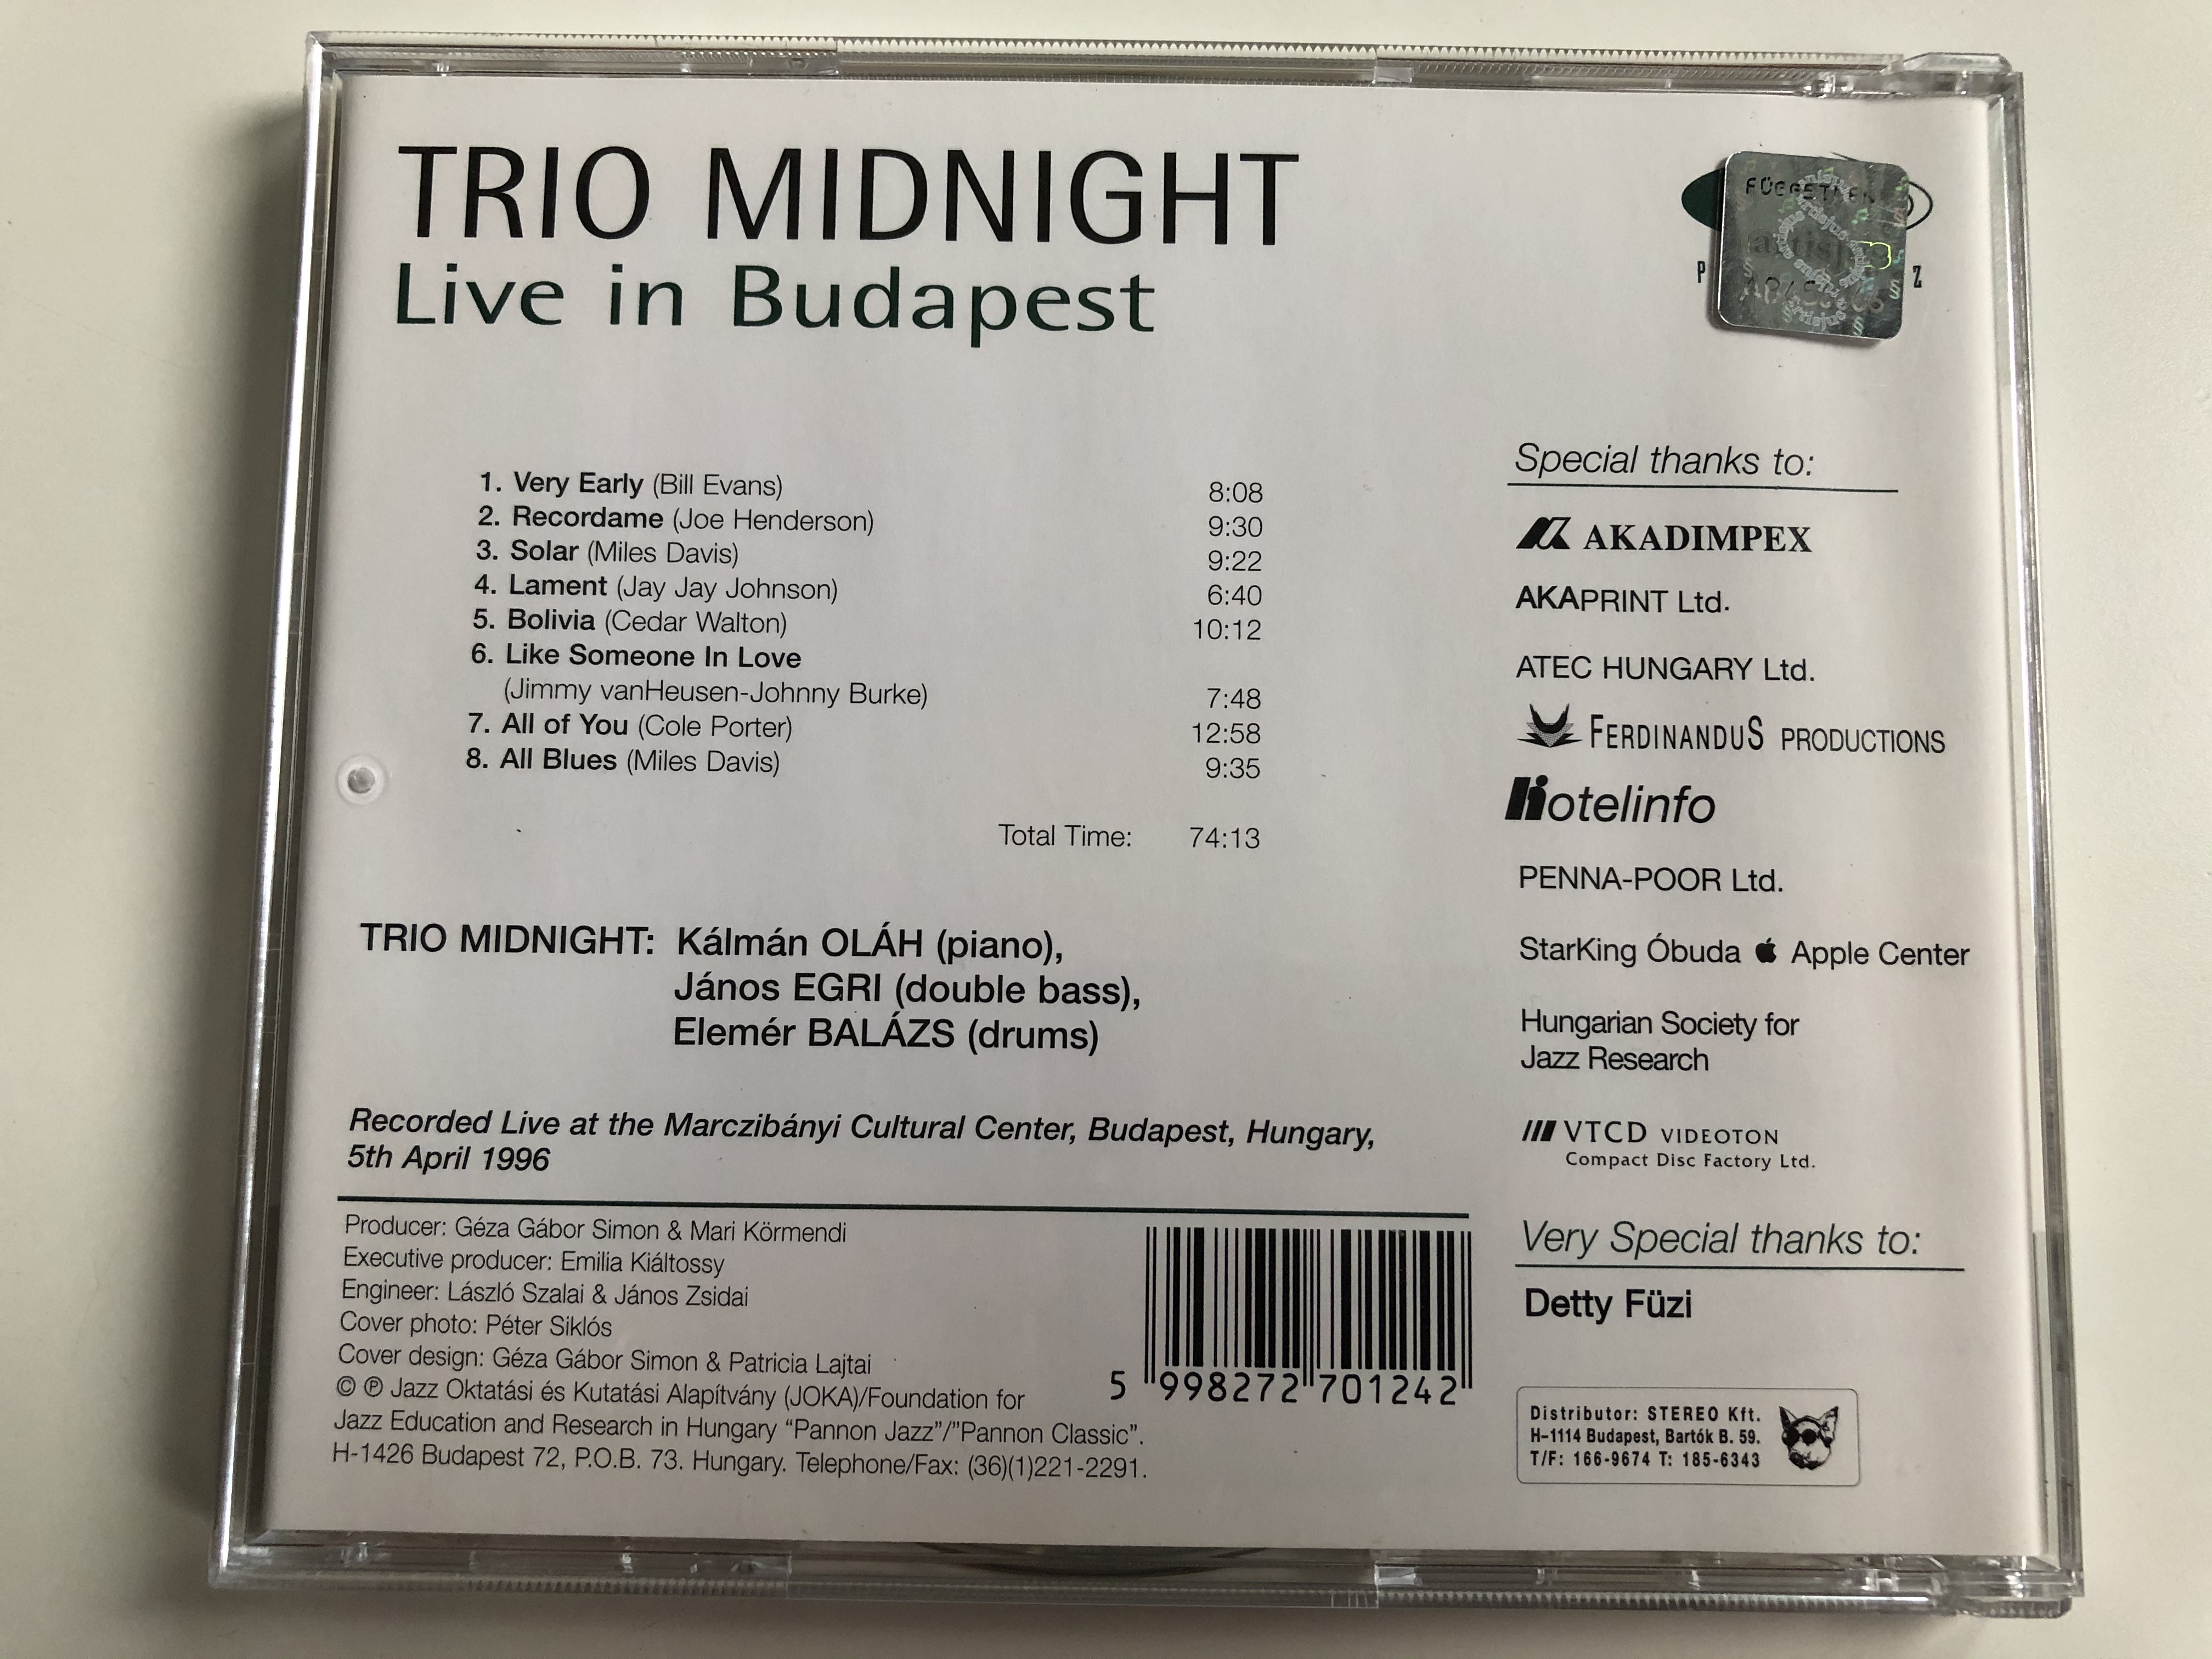 trio-midnight-live-in-budapest-foundation-for-jazz-education-and-research-in-hungary-presents-pannon-jazz-audio-cd-1997-pj-1035-5-.jpg